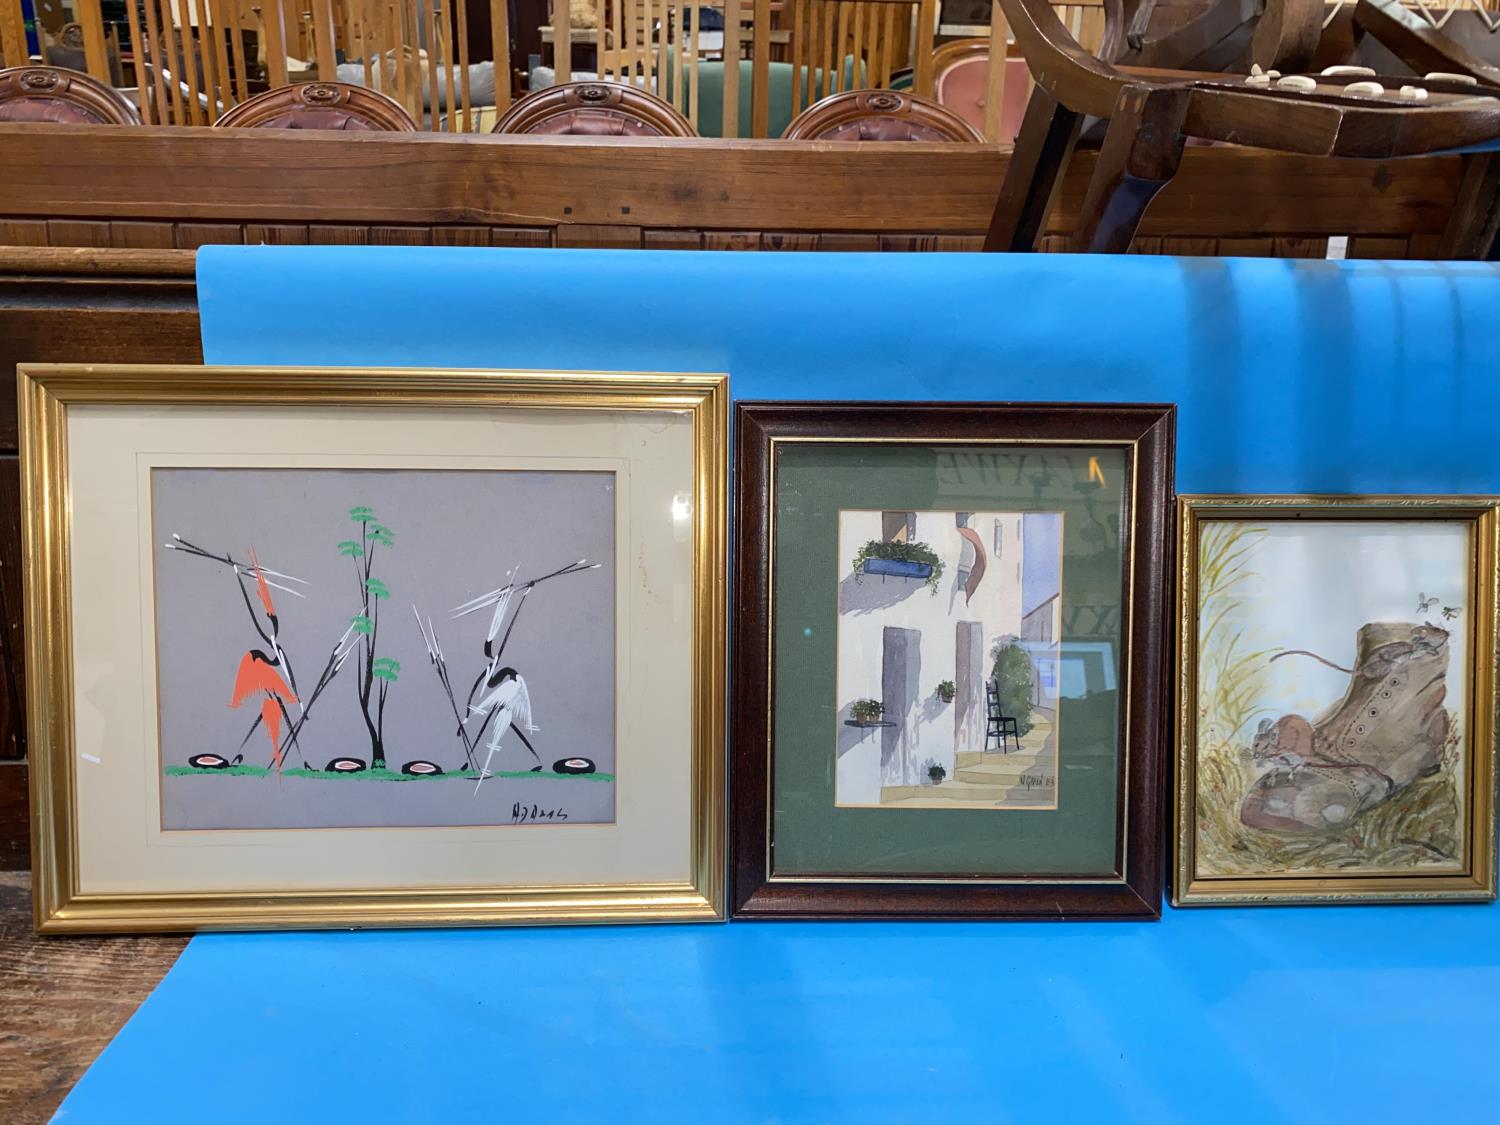 Four watercolour pictures - mouse on a boat; winter Rocky Mountain scene; 2 storks; chair outside